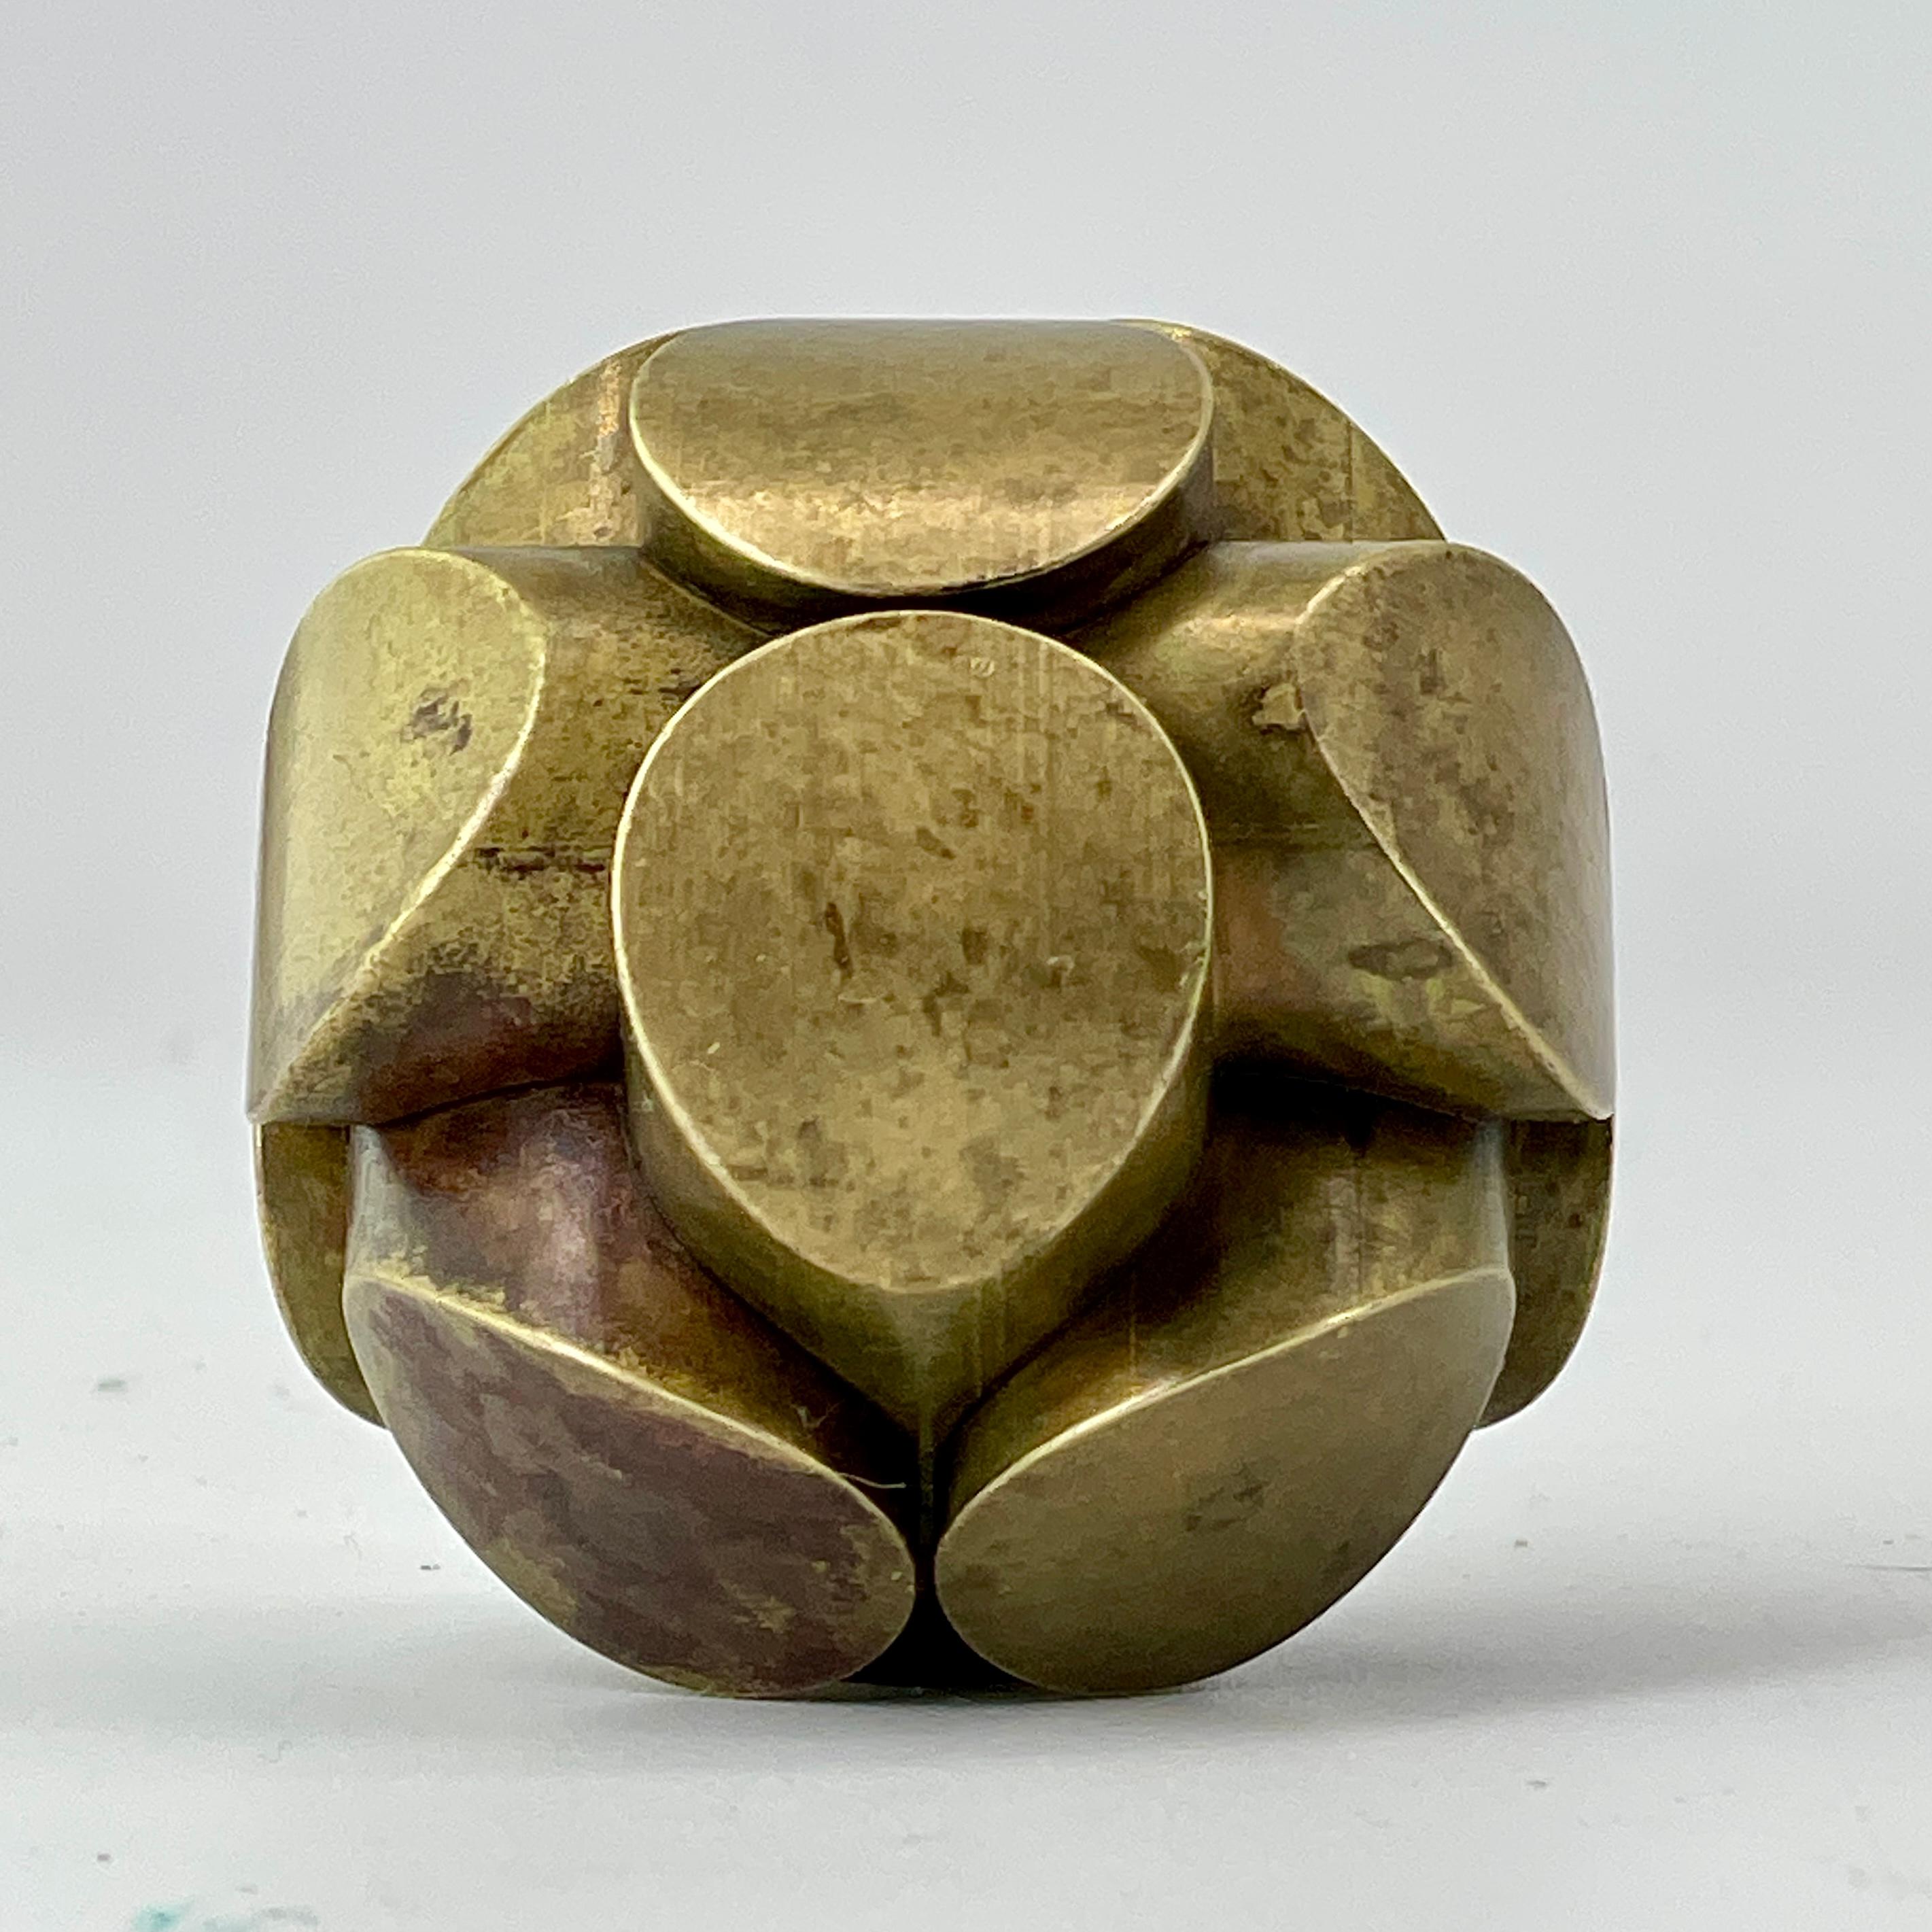 USA, circa 1980s. Vintage Charles O. Perry brass ball puzzle sculpture. Originally designed in the 1960s. Precision craftsmanship, mathematical design. Can be dis-assembled and re-assembled. Signed by artist. Pedestal not included.

Measures: